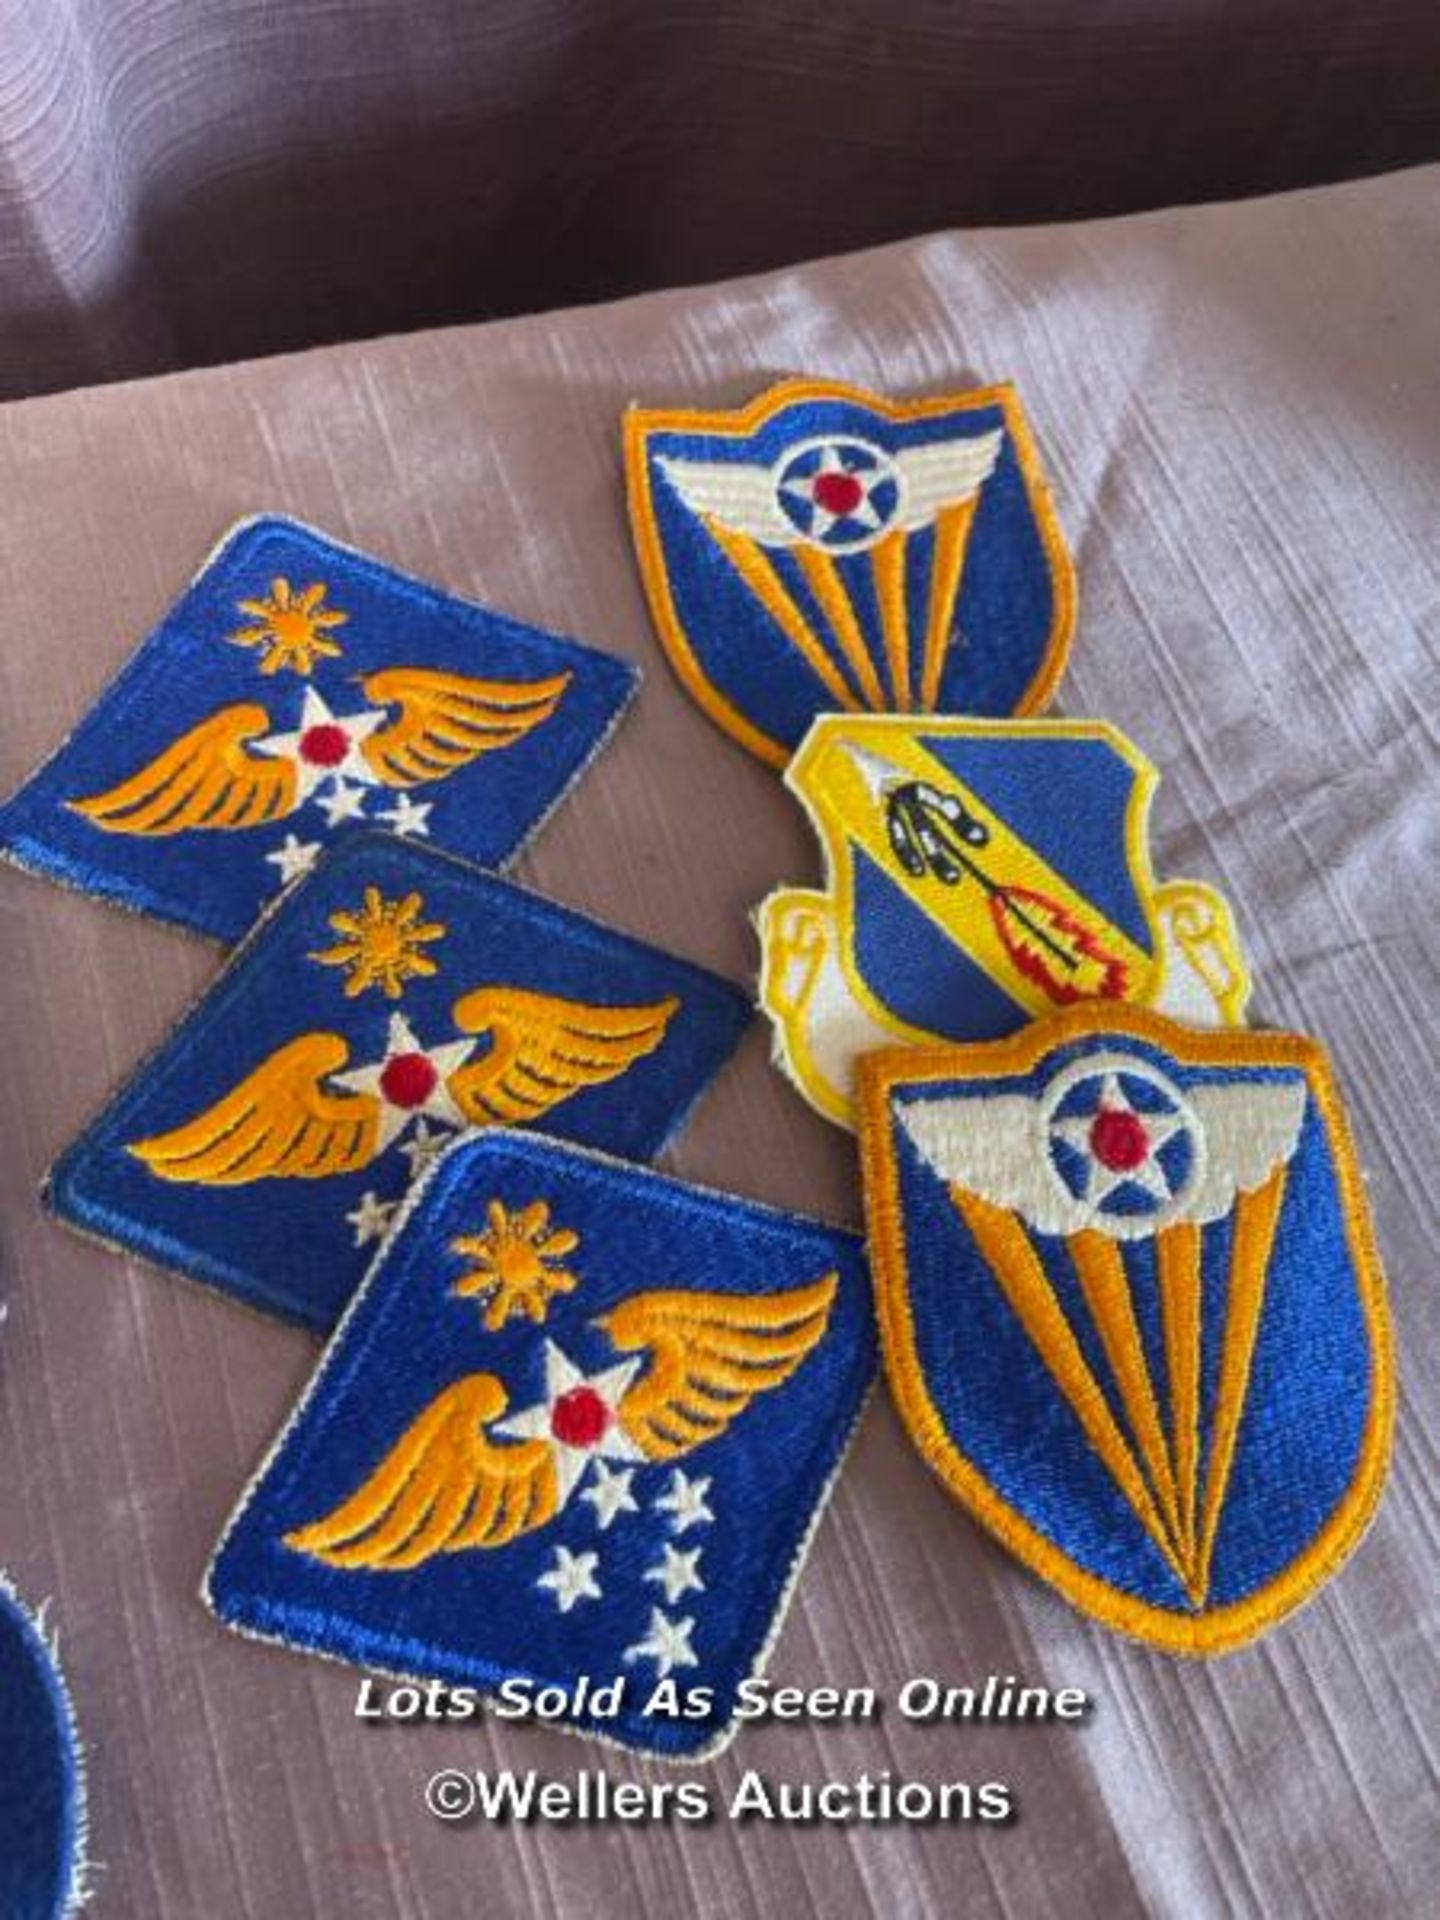 SELECTION OF AMERICAN ARMY AIRFORCE FORMATION PATCHES - Image 3 of 3